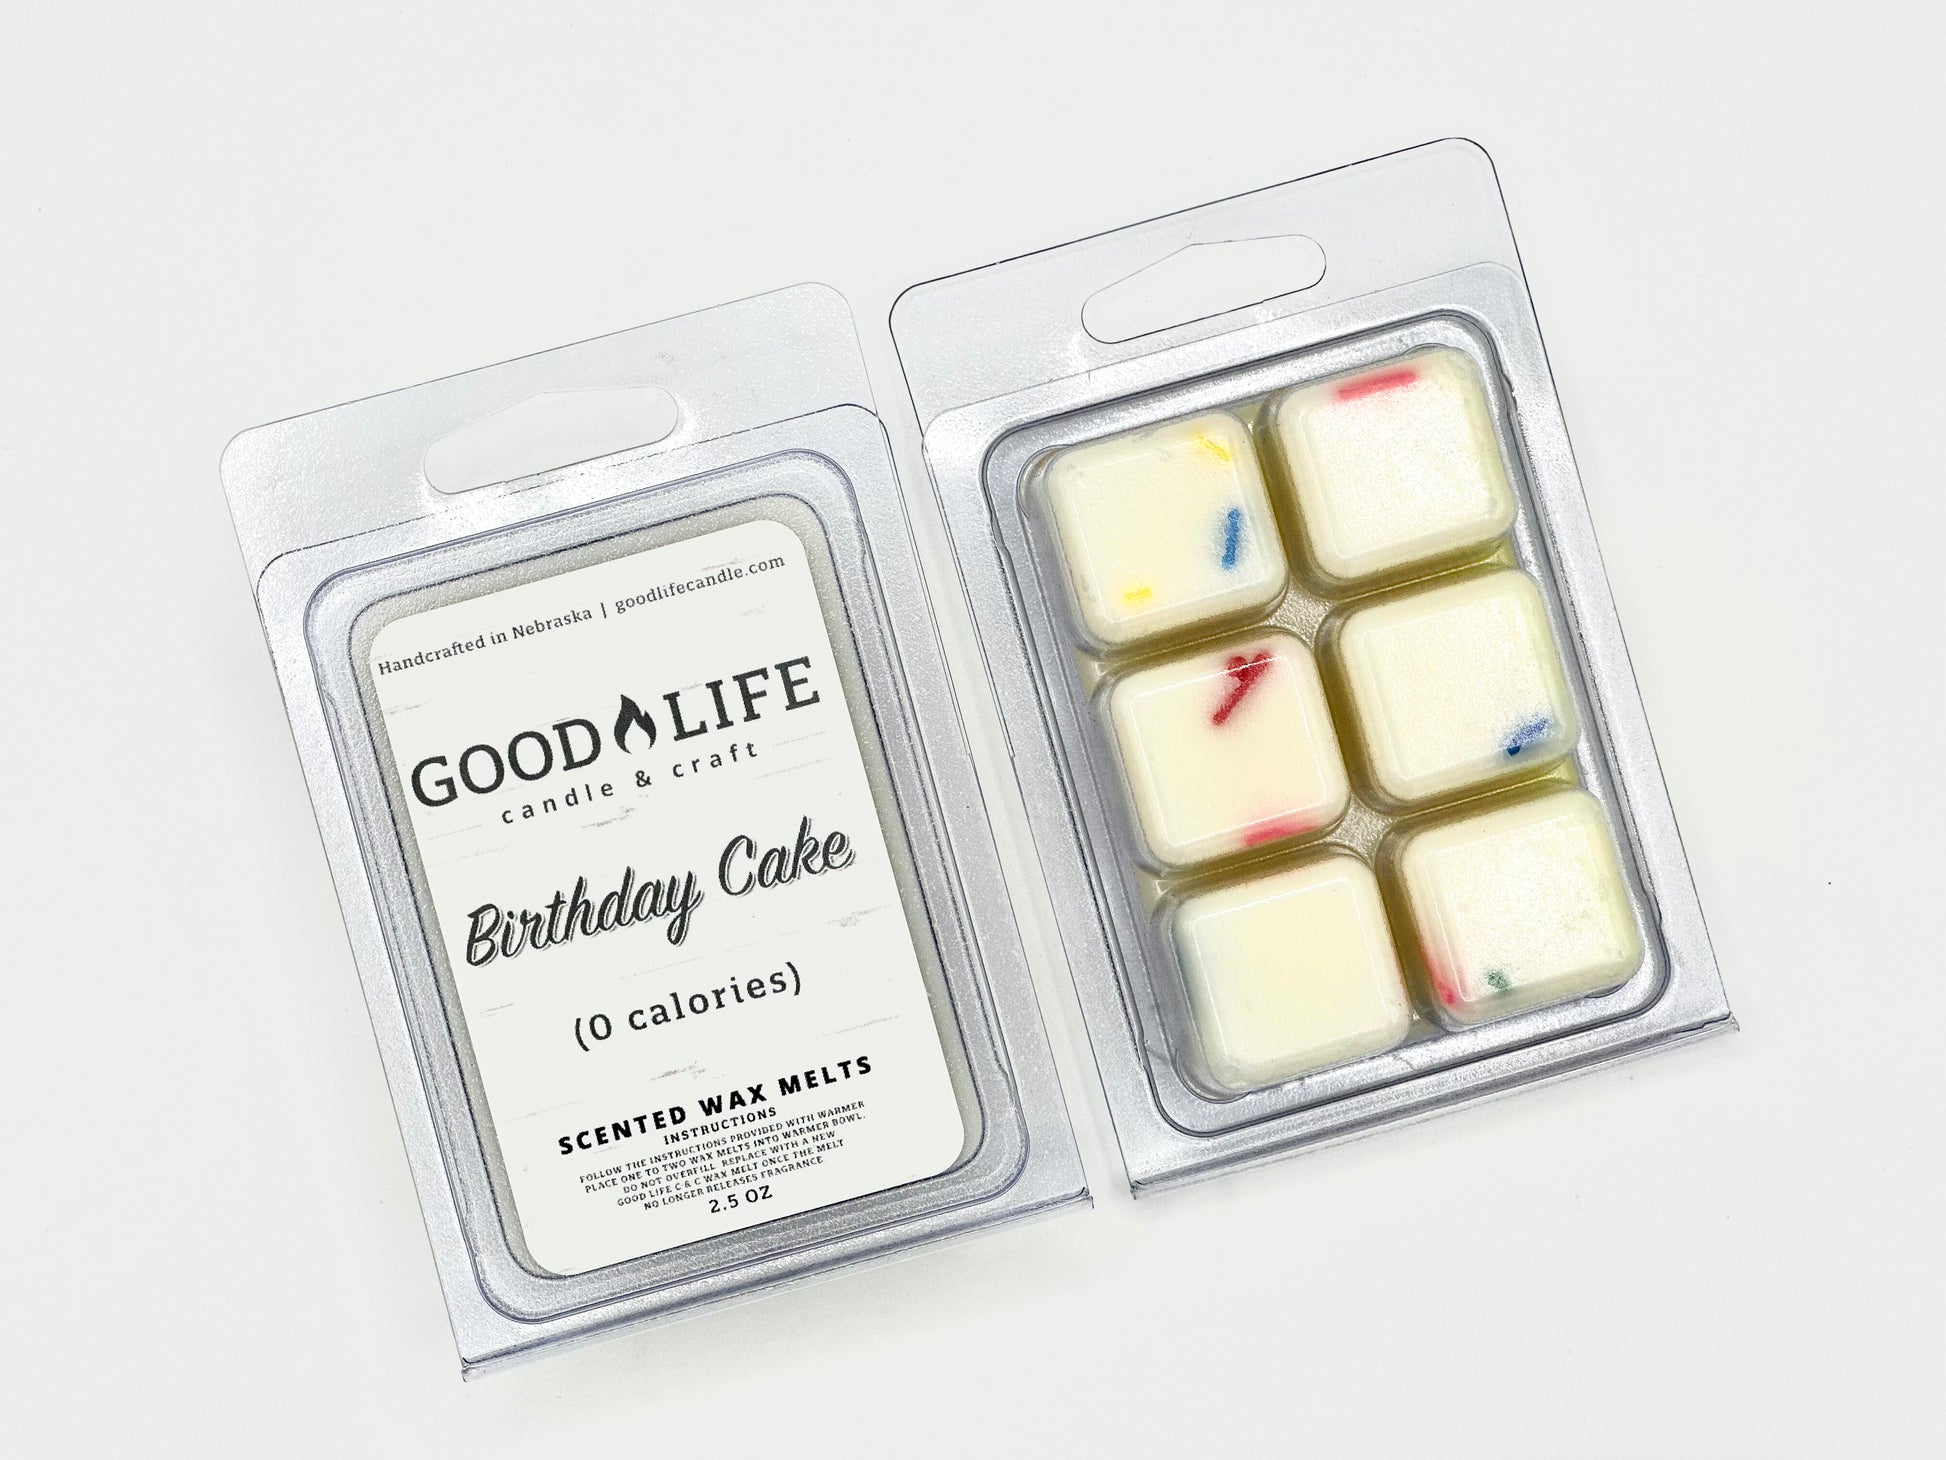 Birthday Cake (0 Calories) Scented Wax Melts – Good Life Candle & Craft